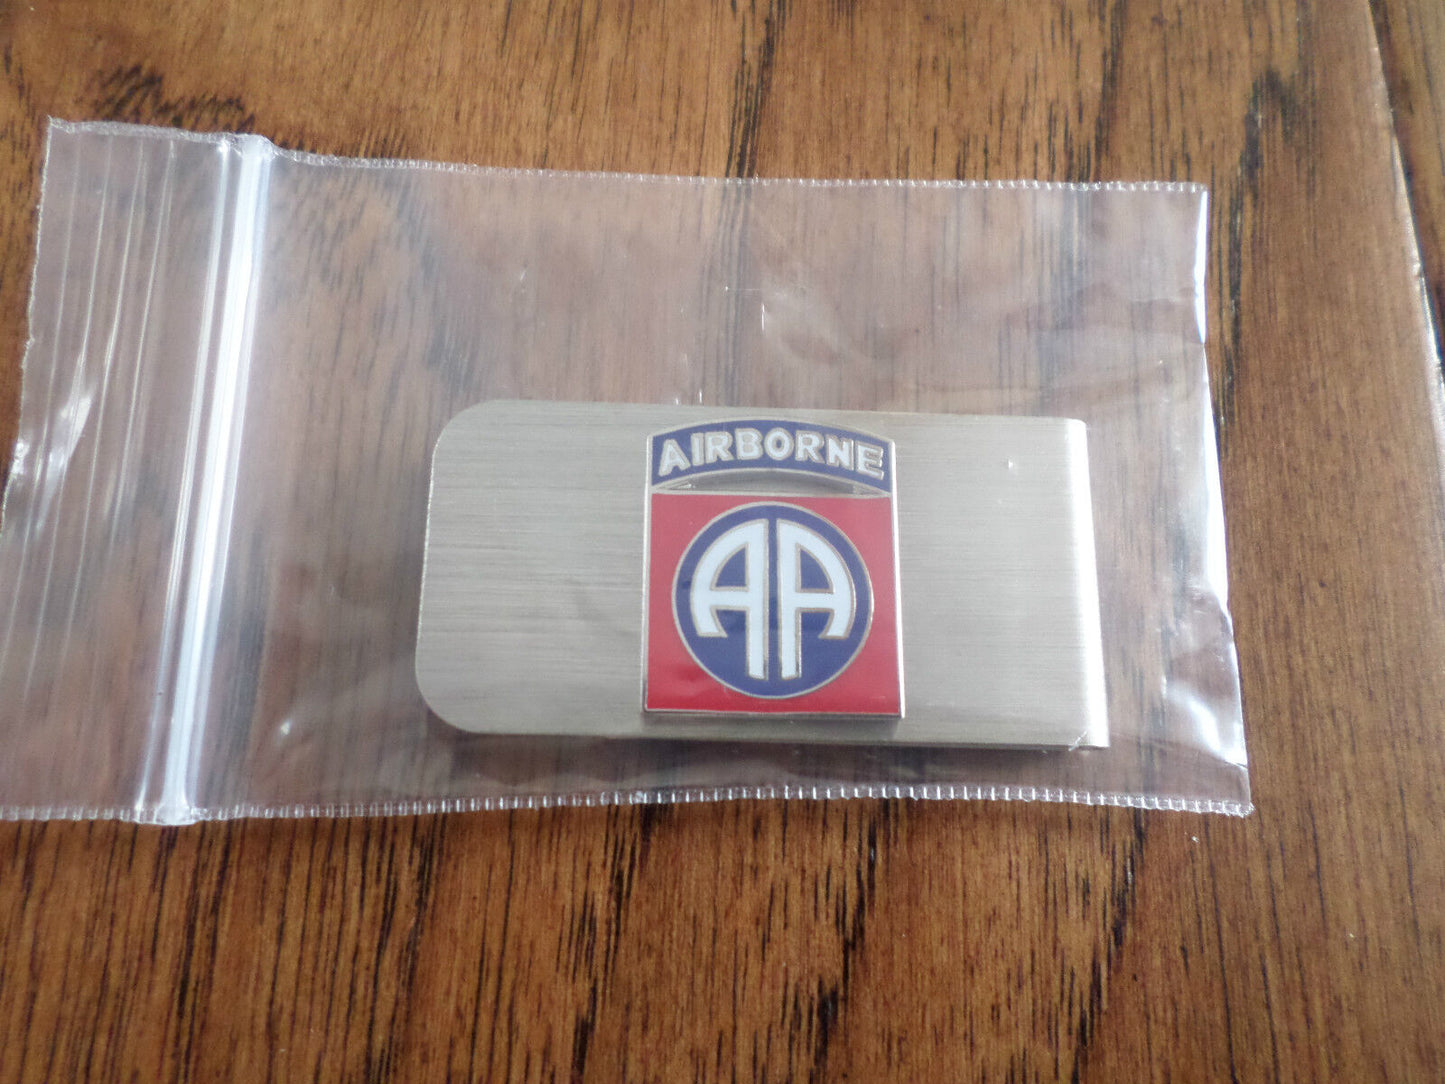 U.S MILITARY ARMY 82ND AIRBORNE DIVISION METAL MONEY CLIP U.S.A MADE